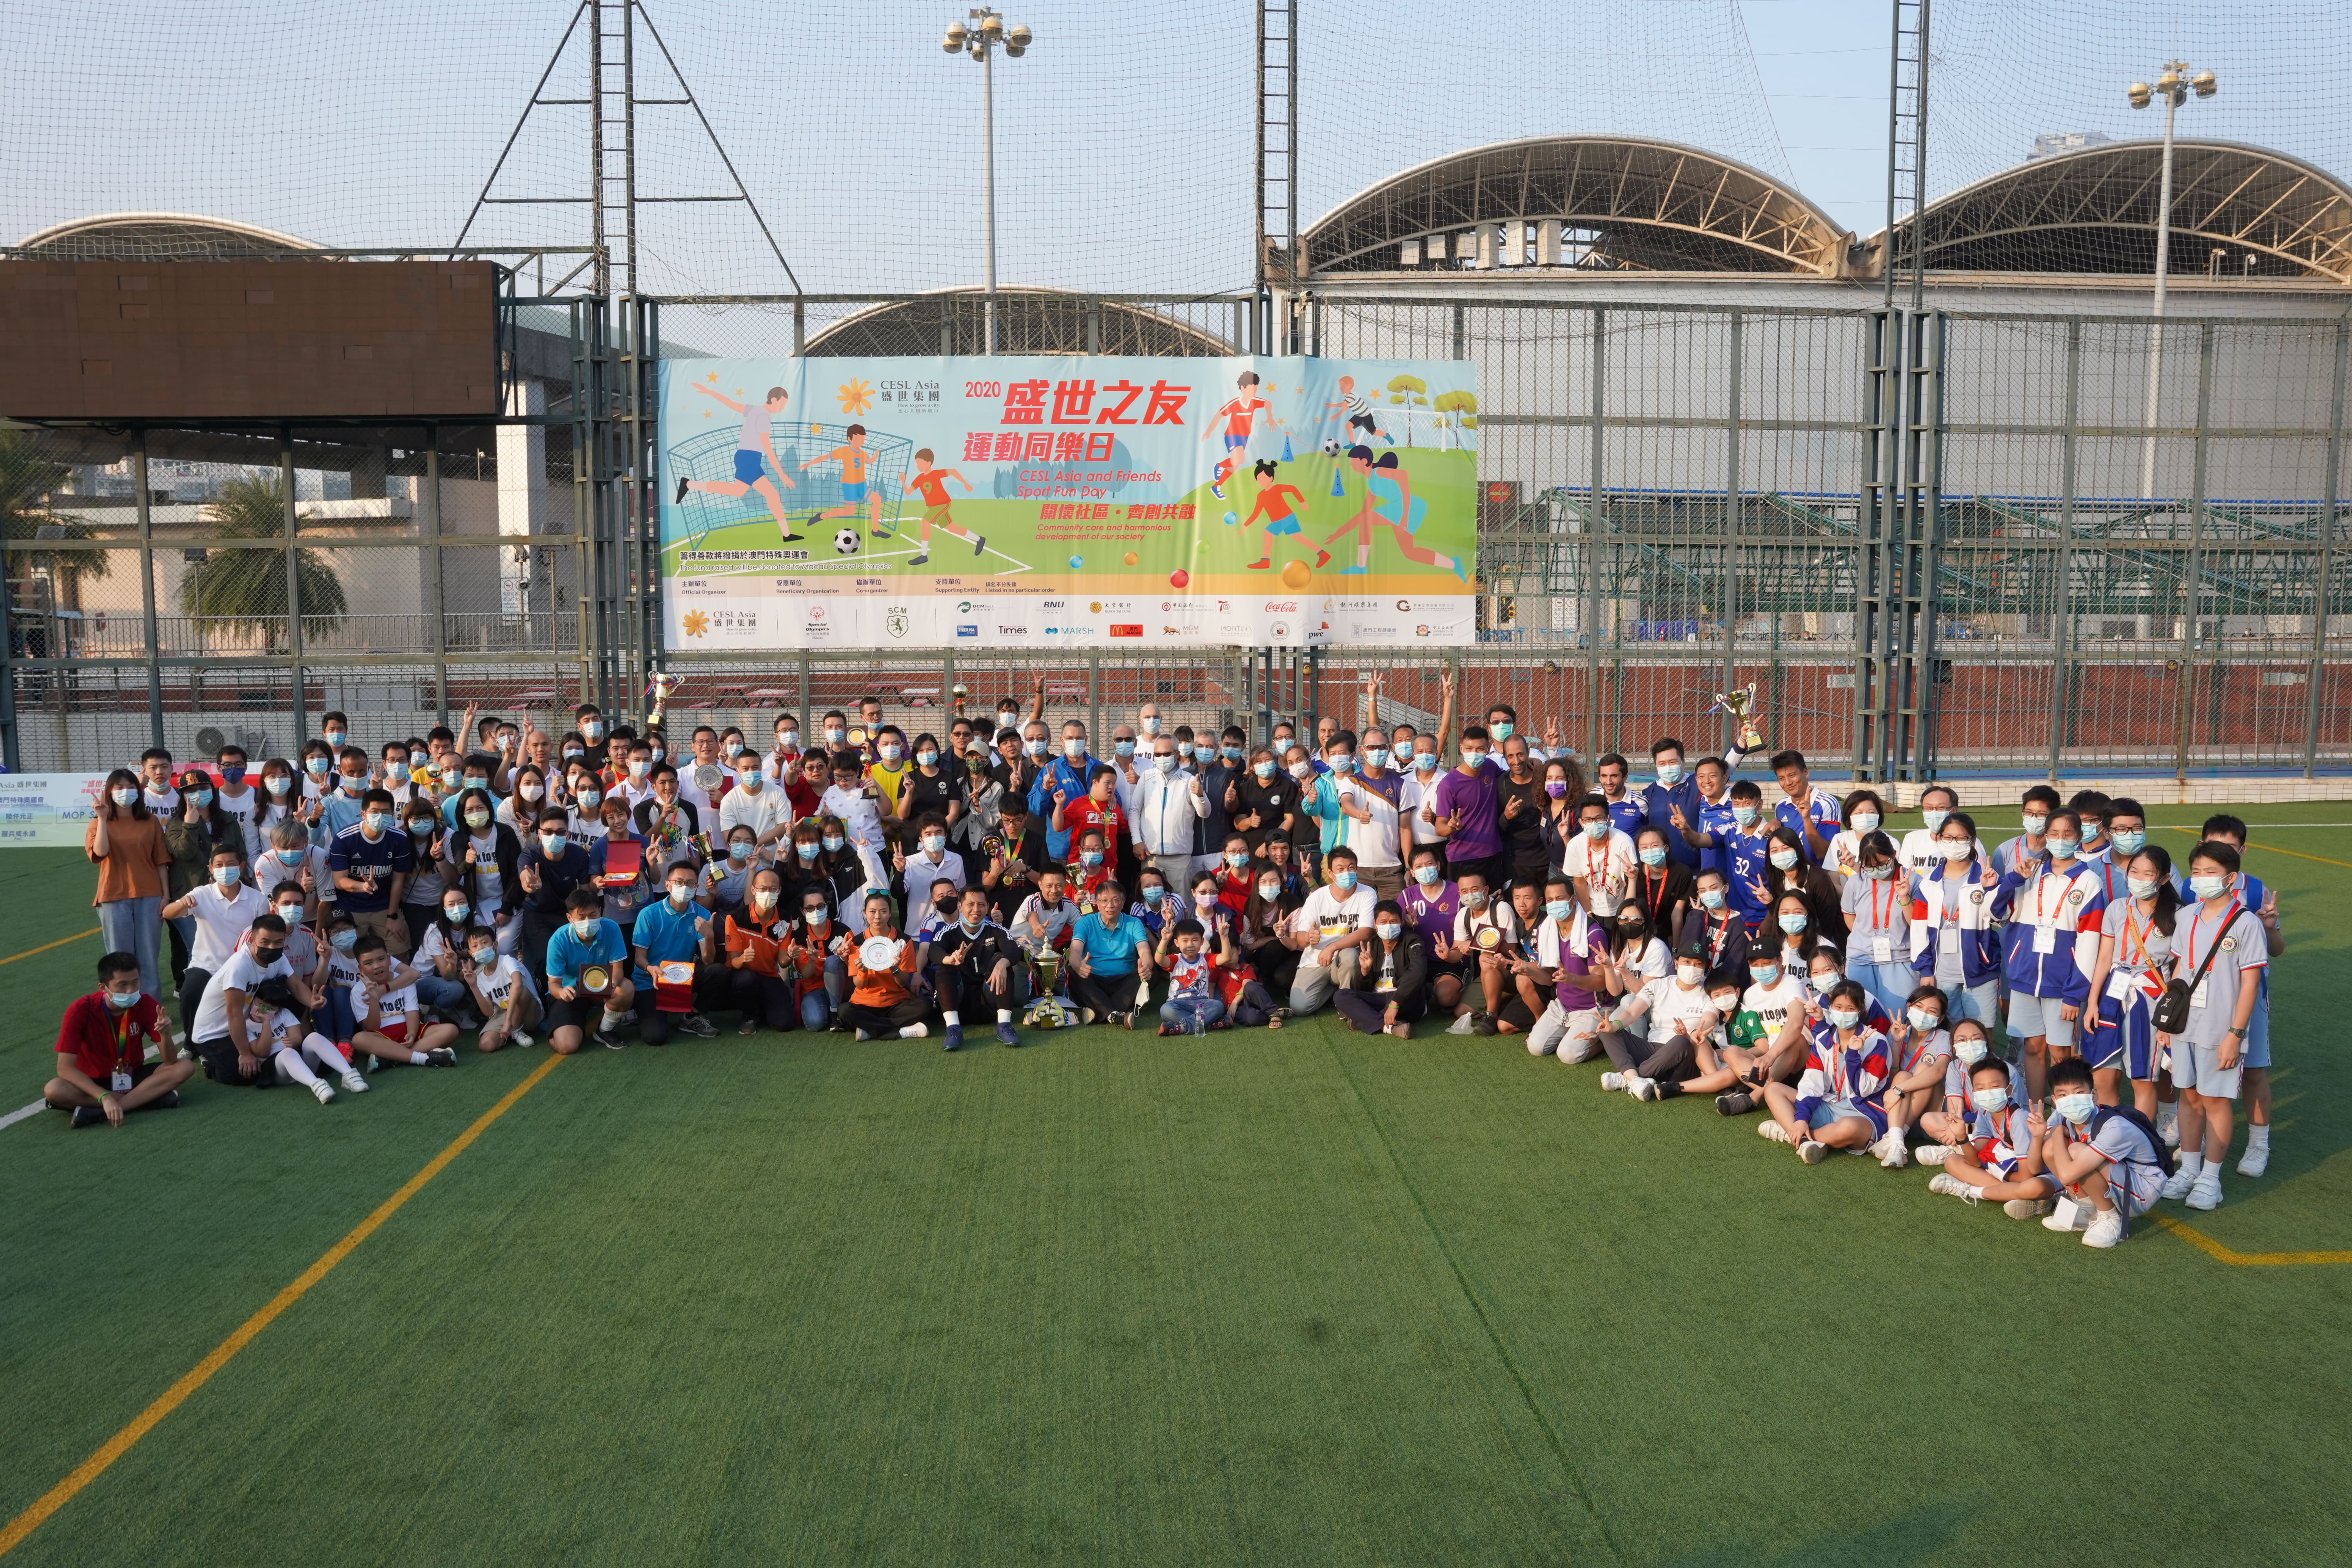 CESL Asia and Friends Sport Fun Day 2020 to Grow an Inclusive City